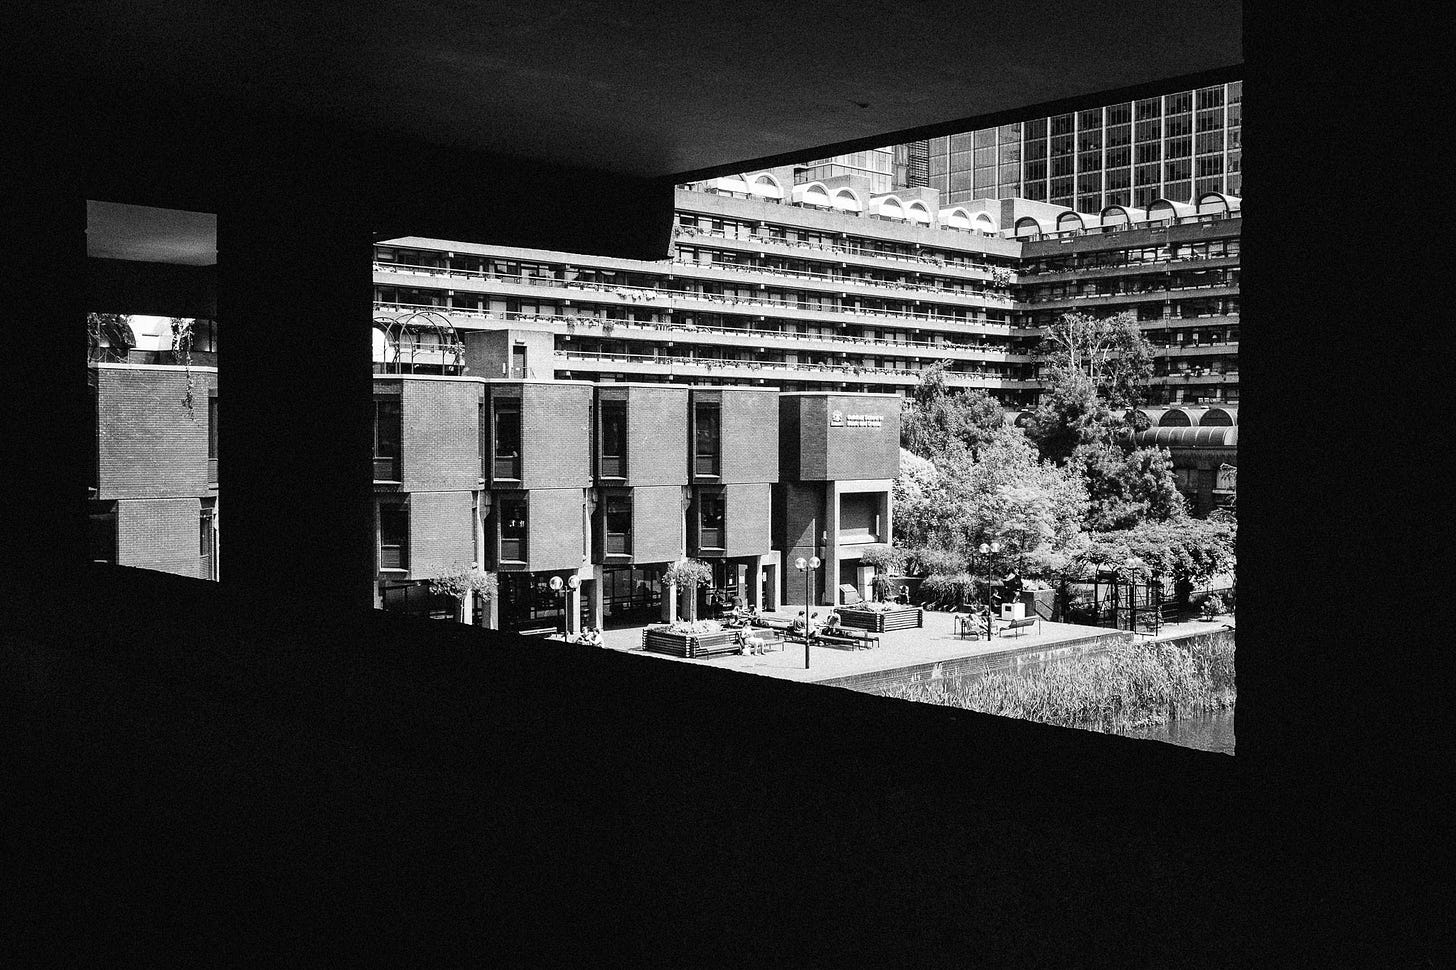 Barbican in London, 2015. From an elevated corridor the view opens out over the inside of Barbican. There are many floors with plants hanging down from them.